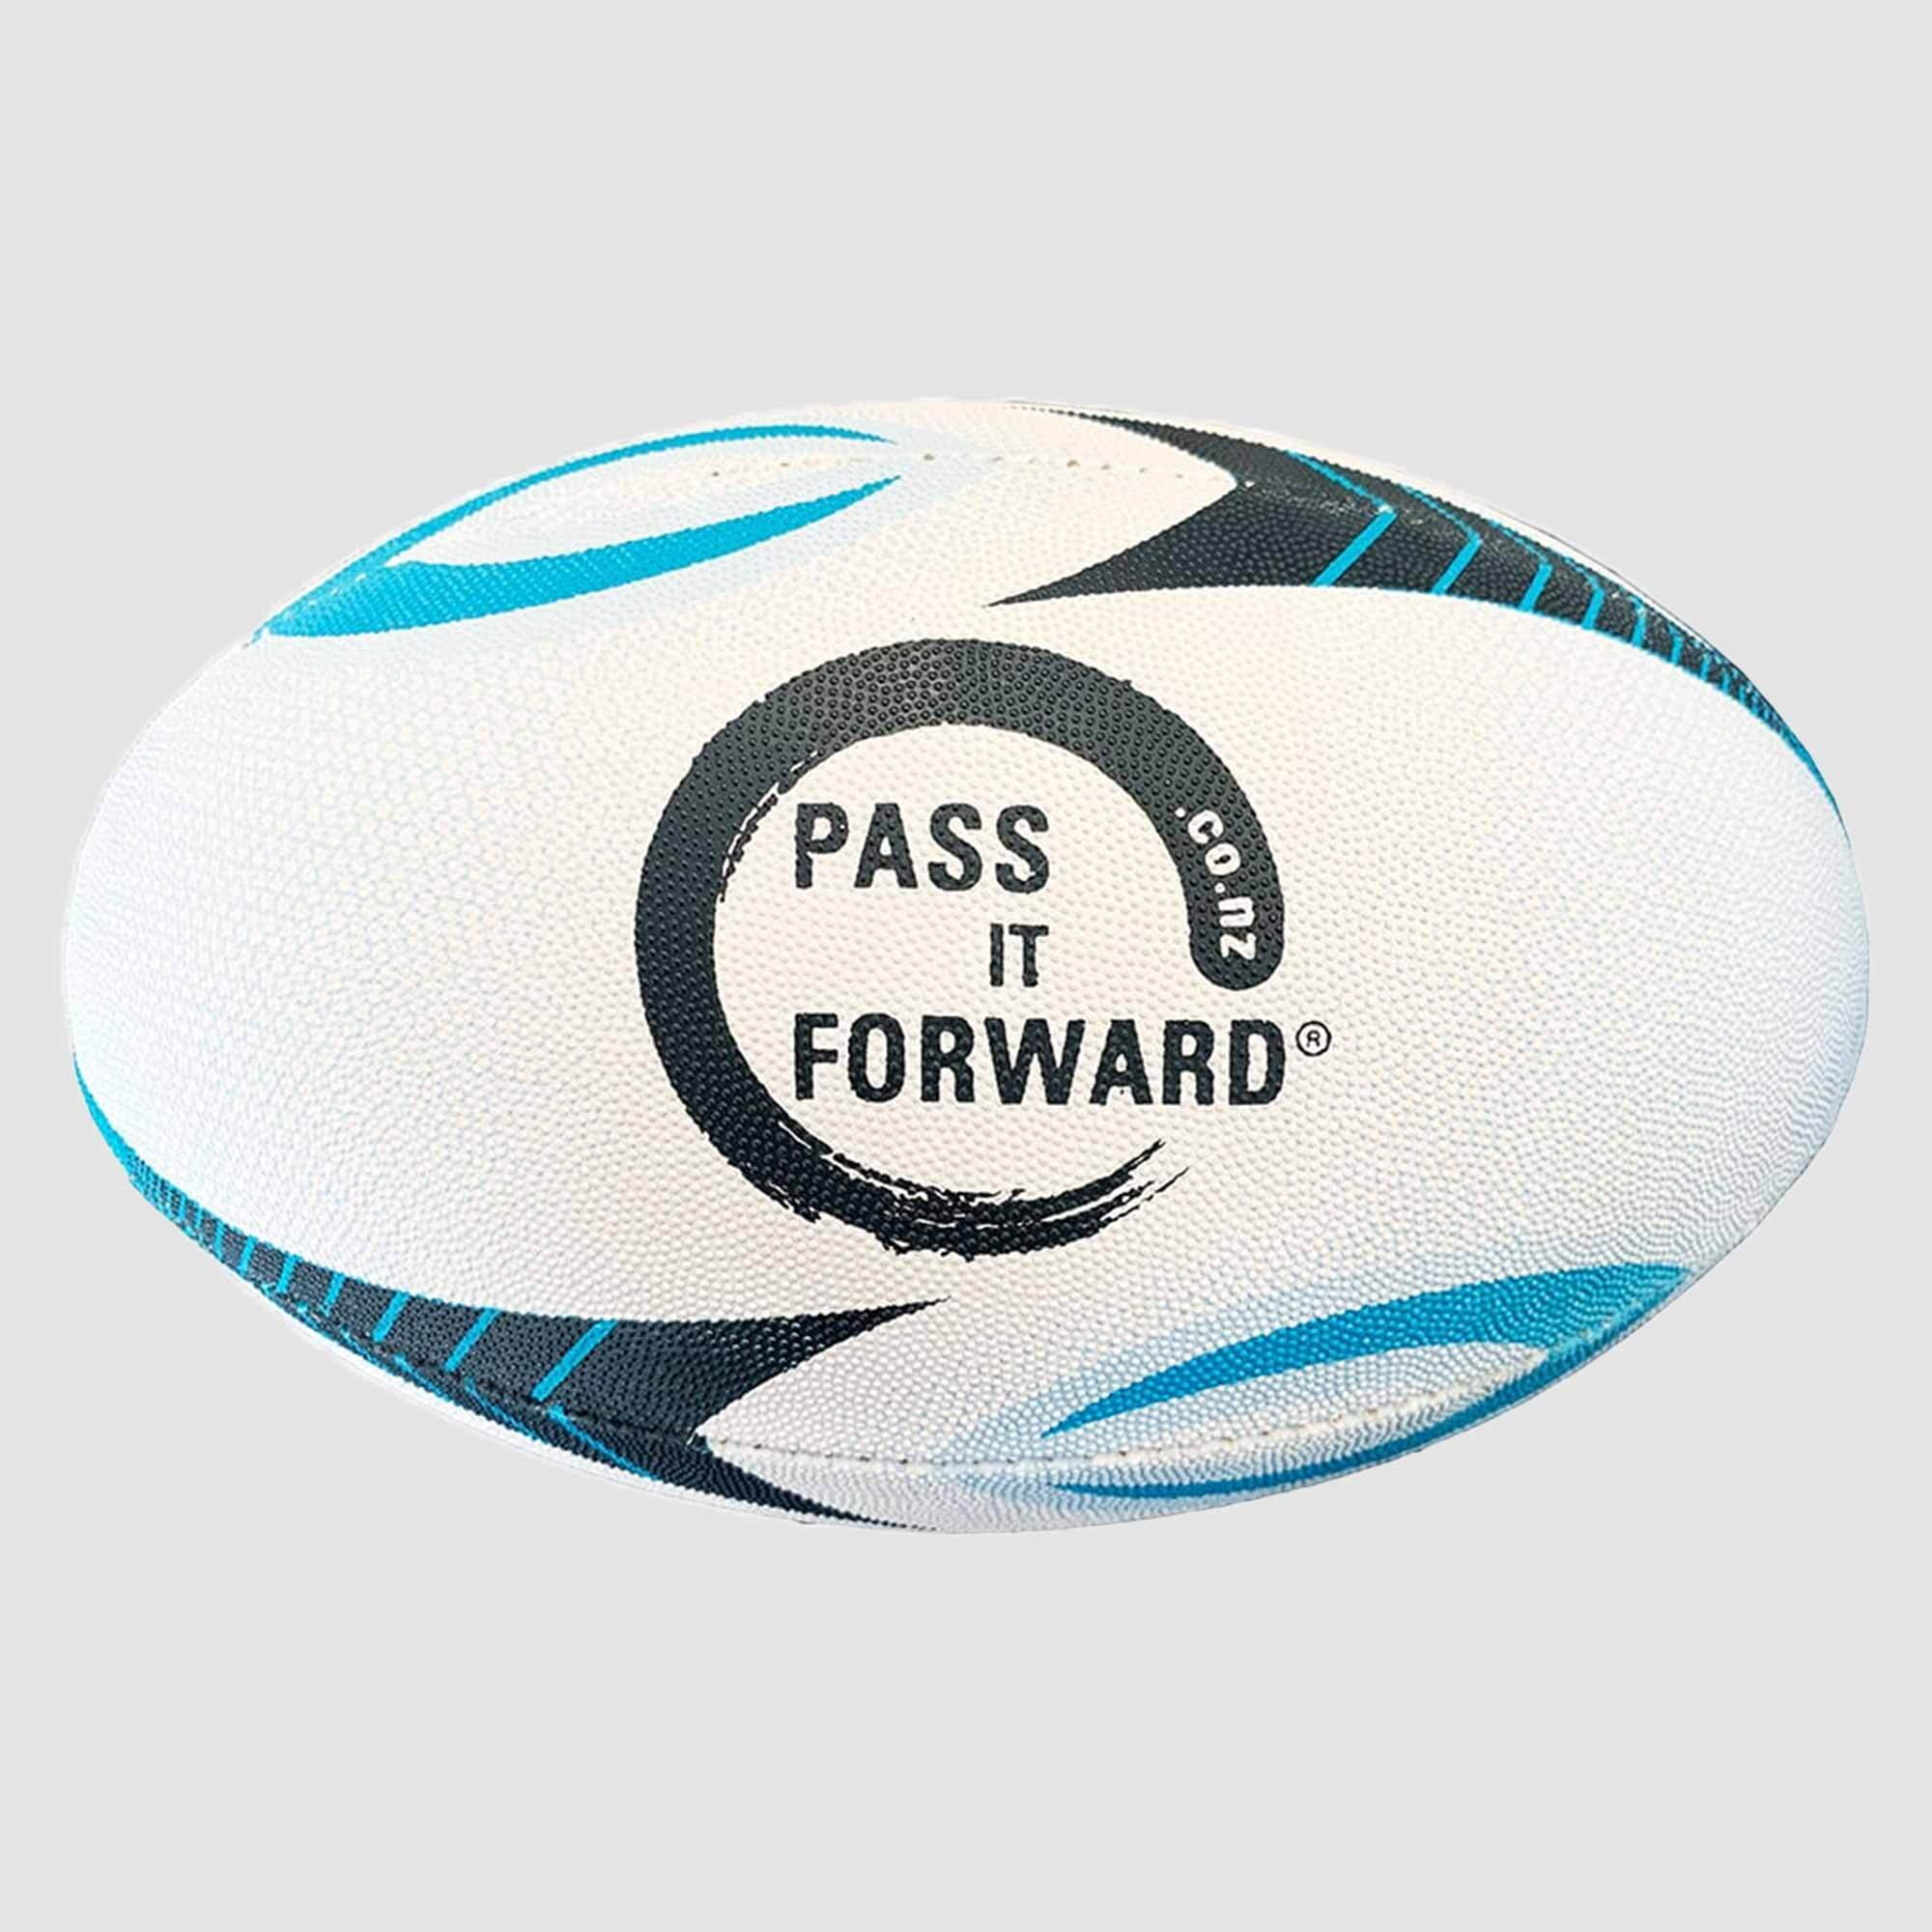 Silver Fern Pass it forward Rugby Ball Blue Size 3